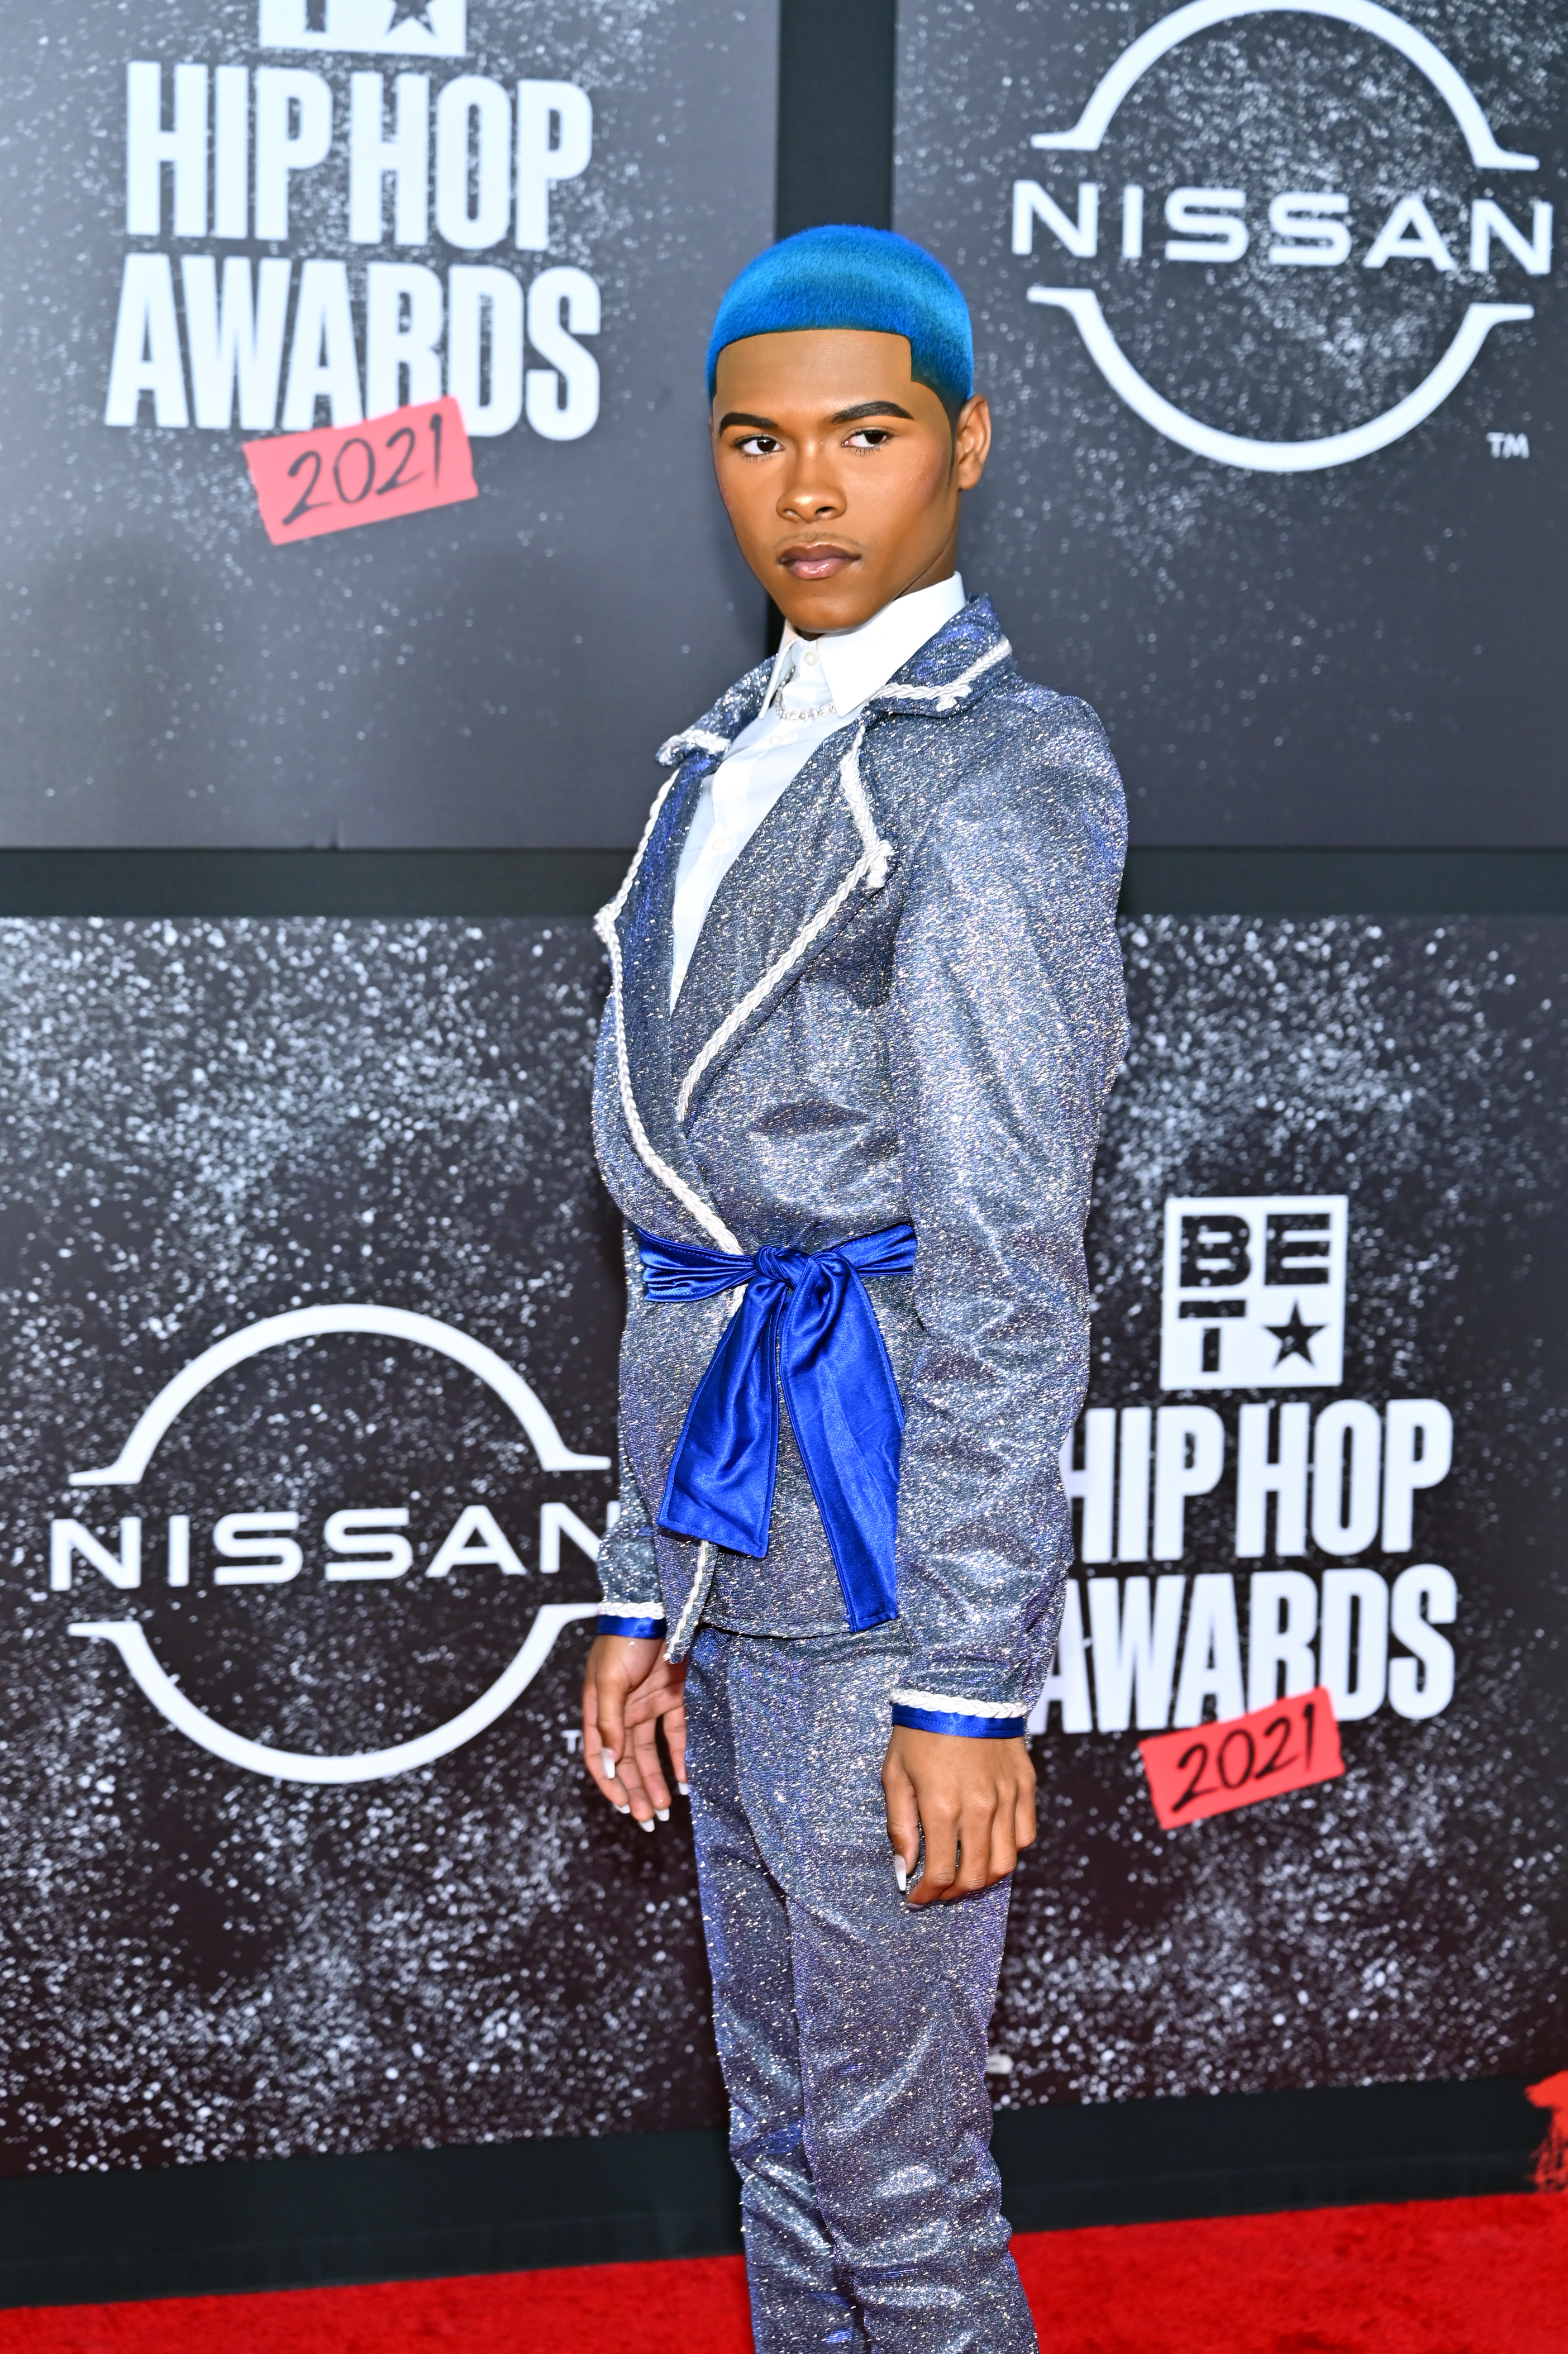 Kidd Kenn in a glittery suit at the 2021 BET Hip Hop Awards red carpet